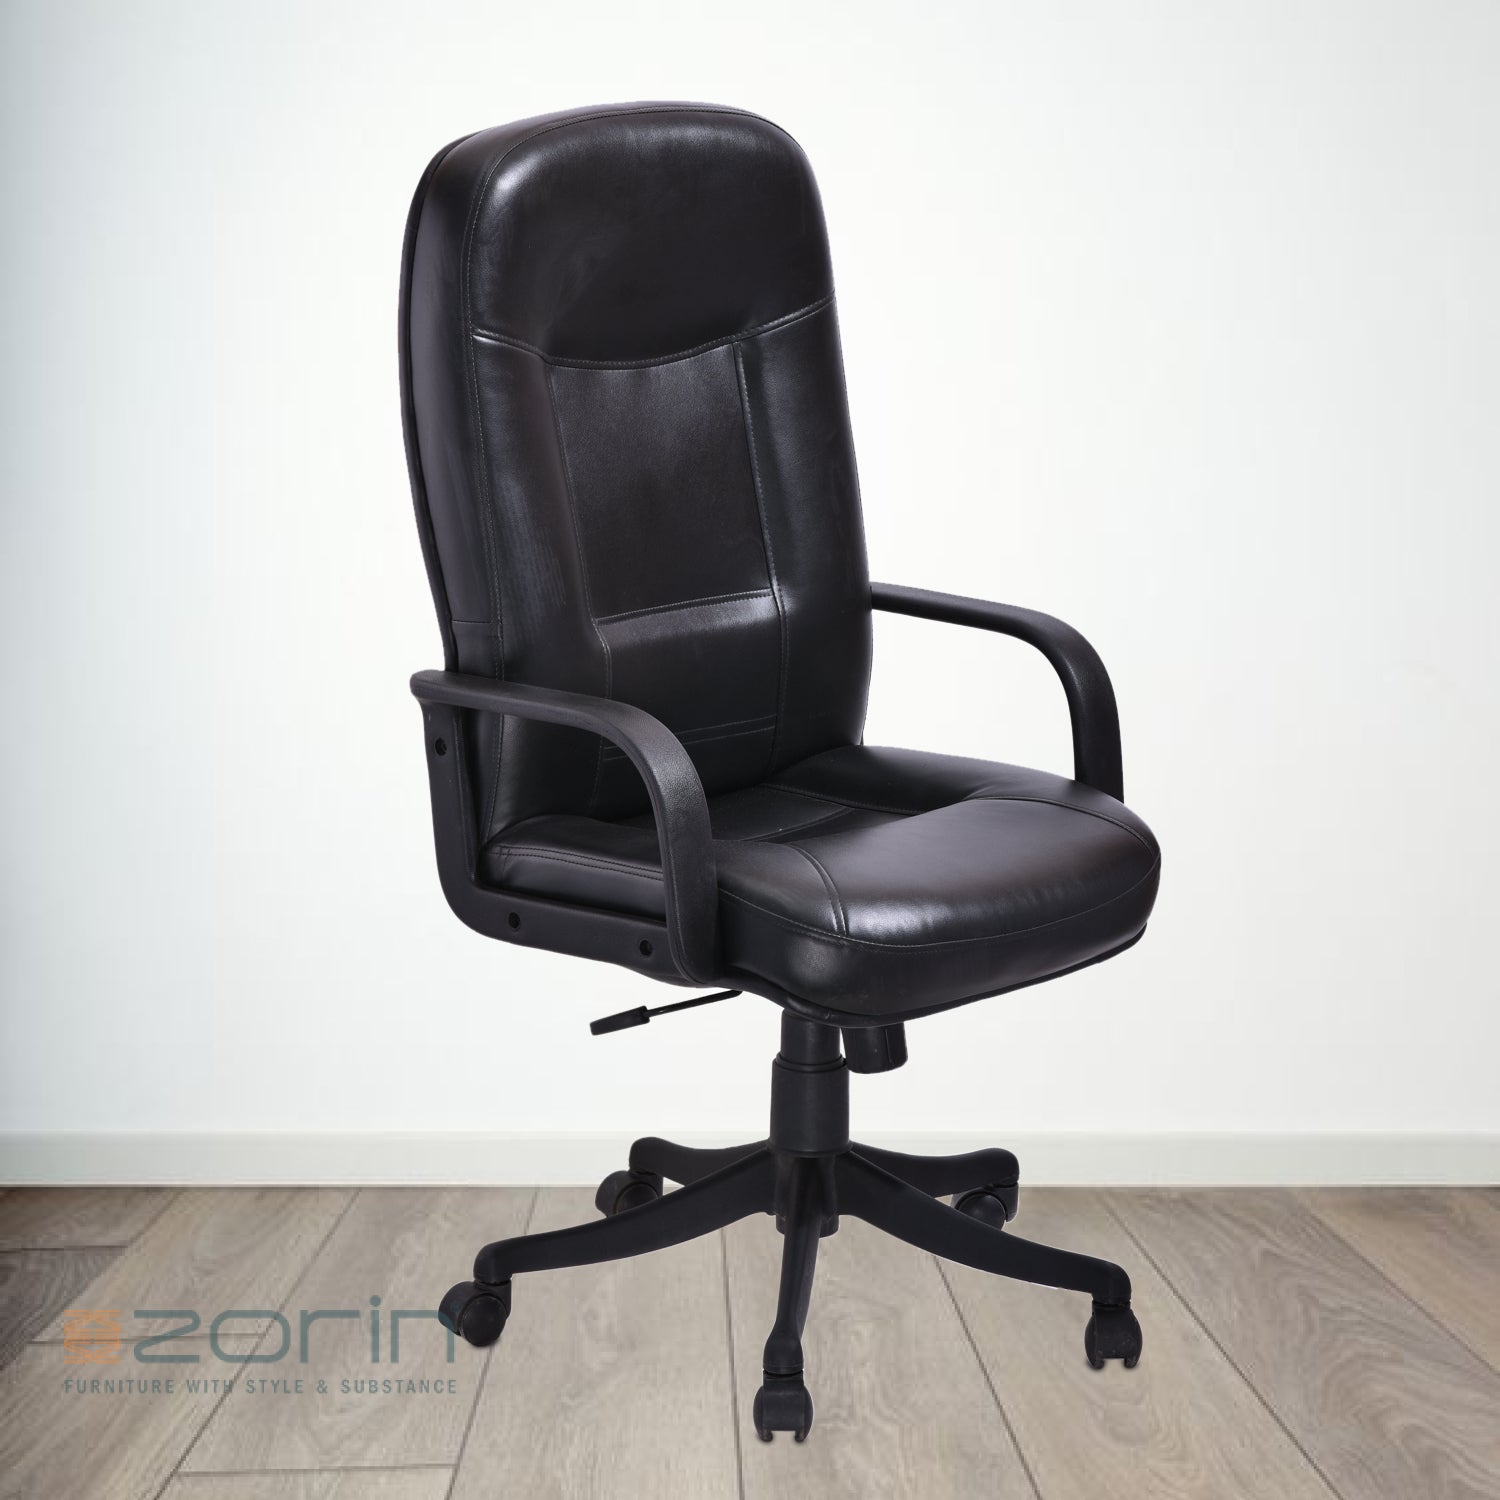 ZSE1043 High Back Chair by Zorin in Black Color Zorin